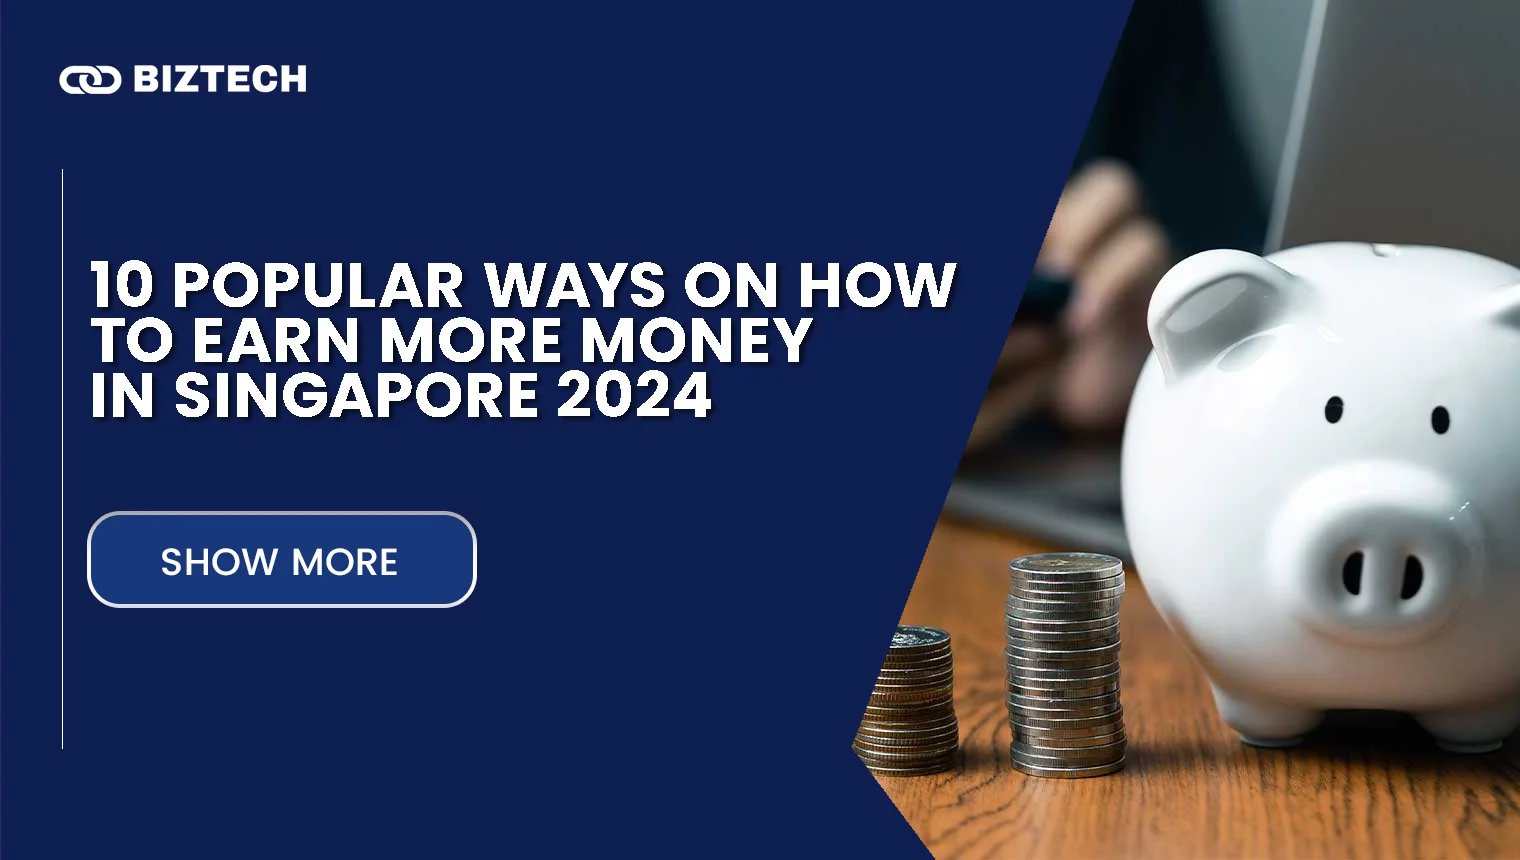 10 Popular Ways on How to Earn More Money in Singapore 2024